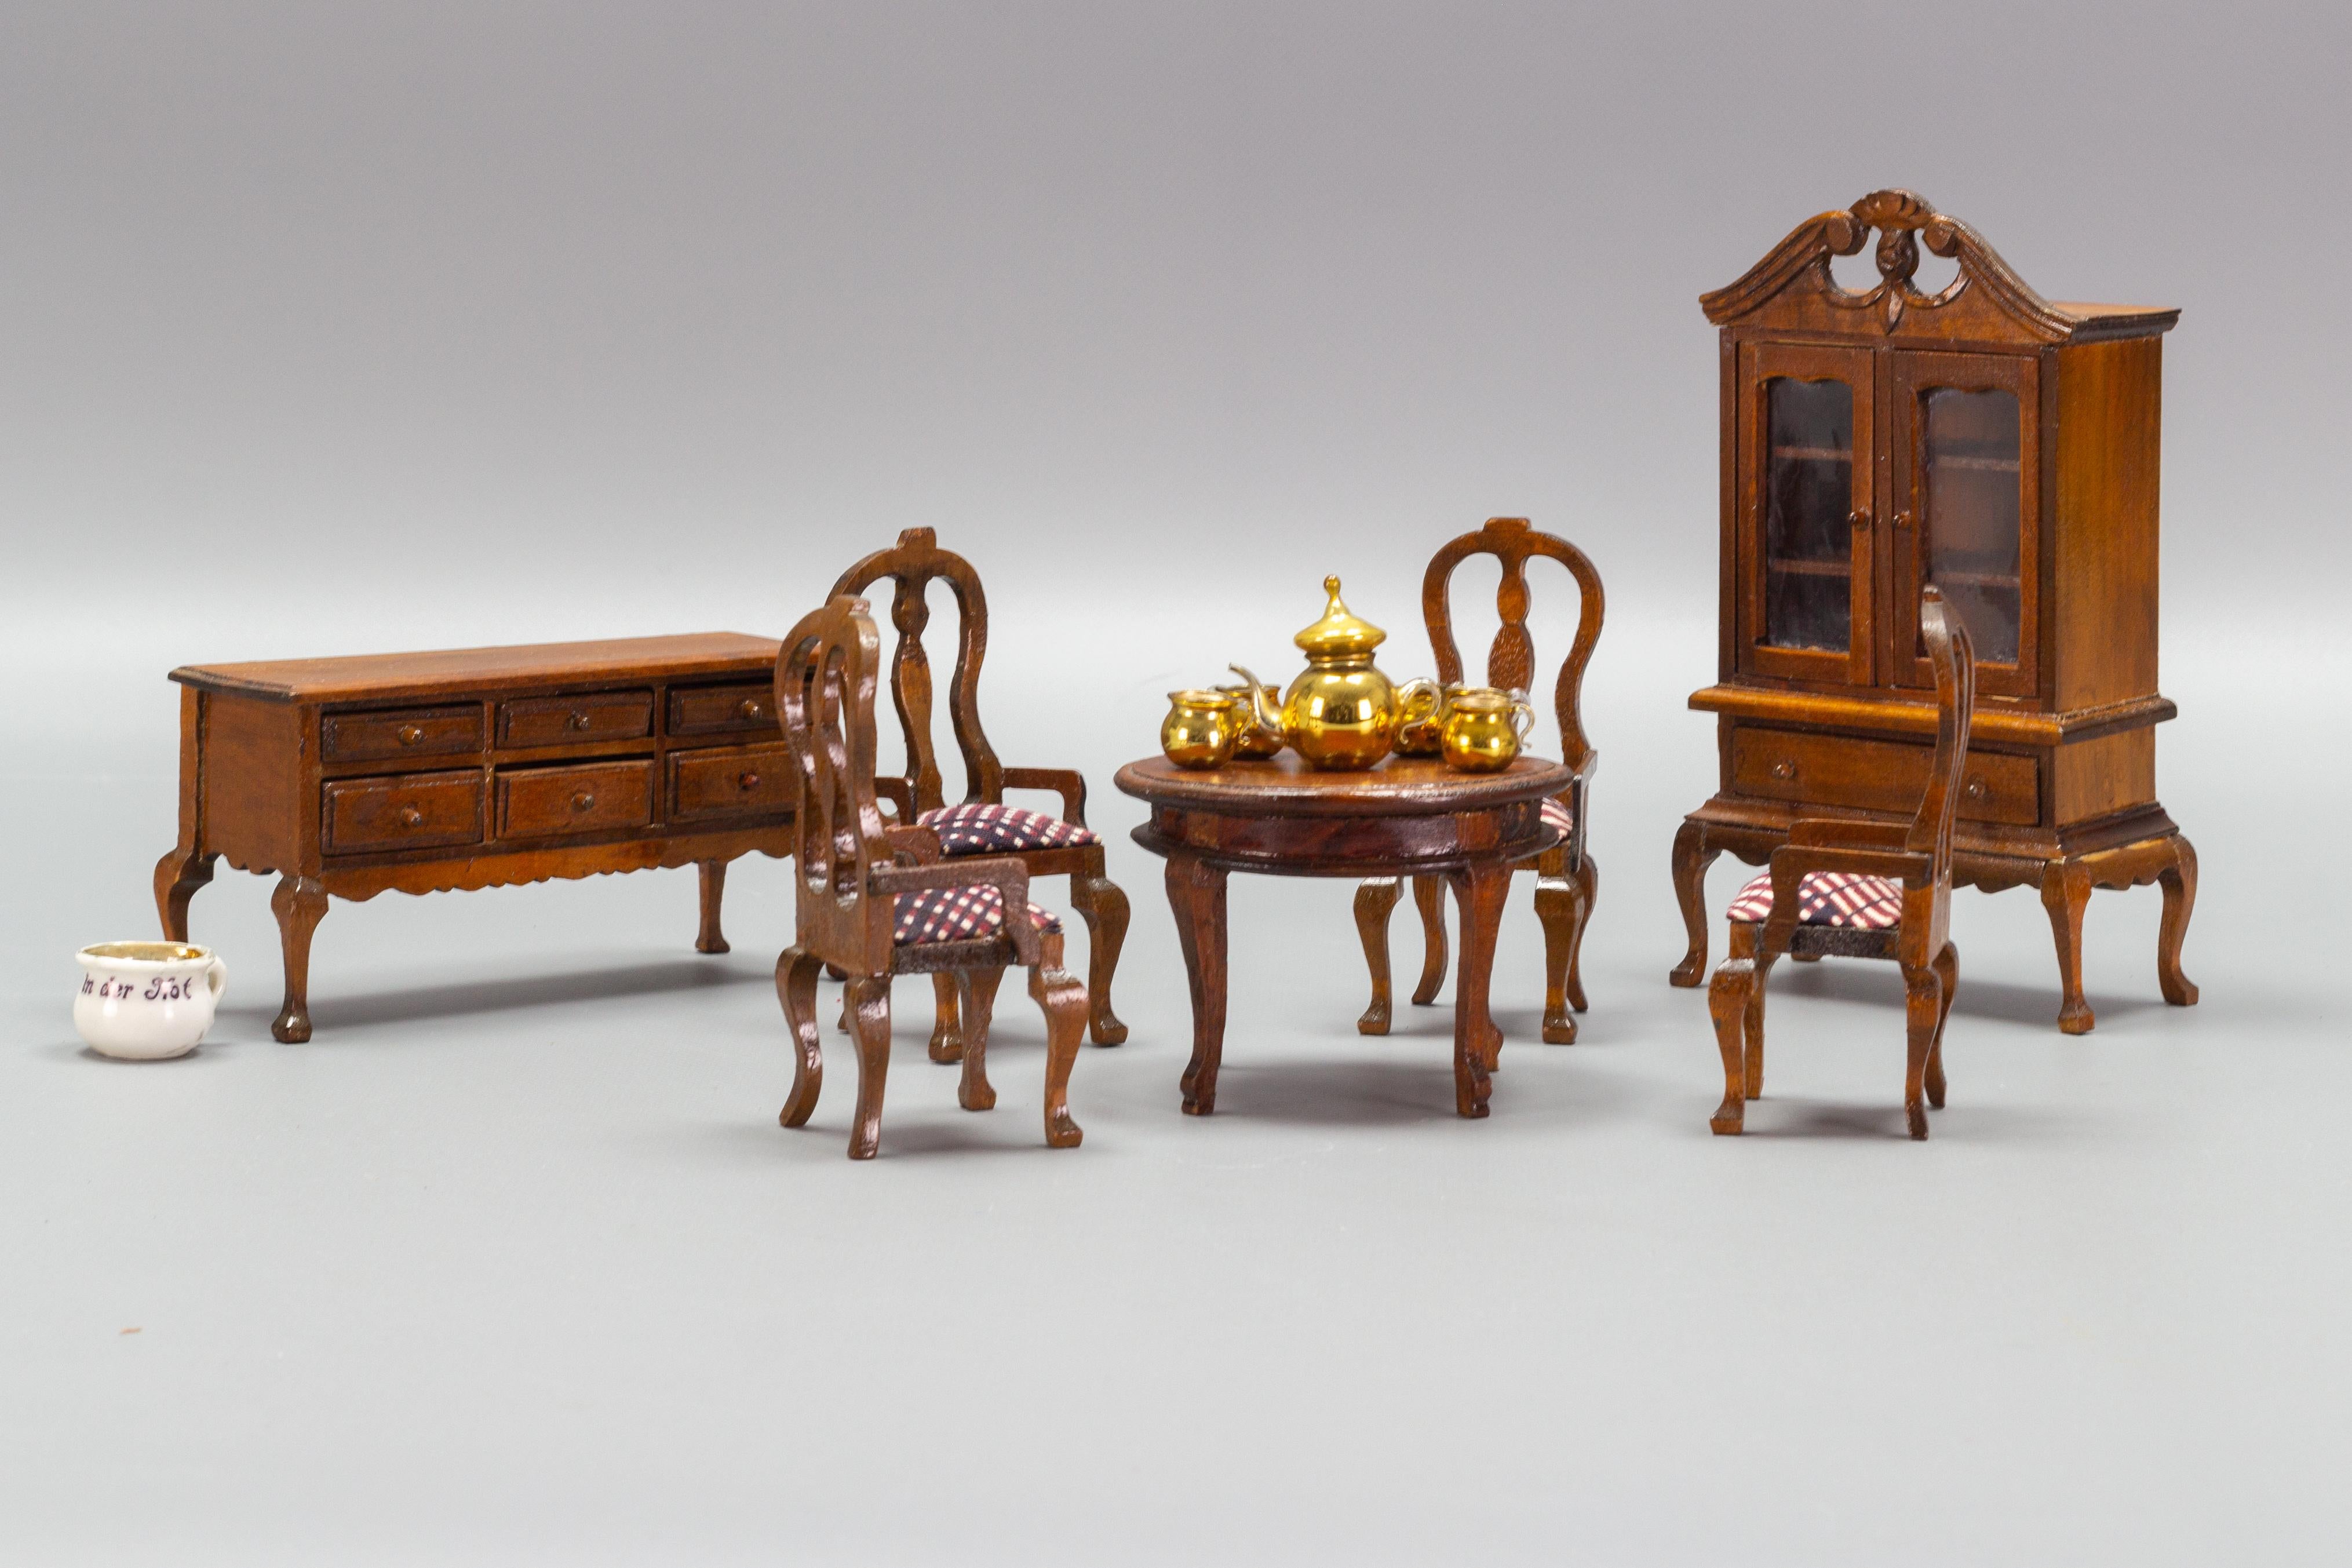 Adorable miniature doll furniture set, made of wood, Germany, 1970s.
This beautiful Chippendale-style dining room furniture set consists of a round table and four chairs, a chest of drawers, and a cupboard. 
Dimensions of the cupboard: height: 18 cm